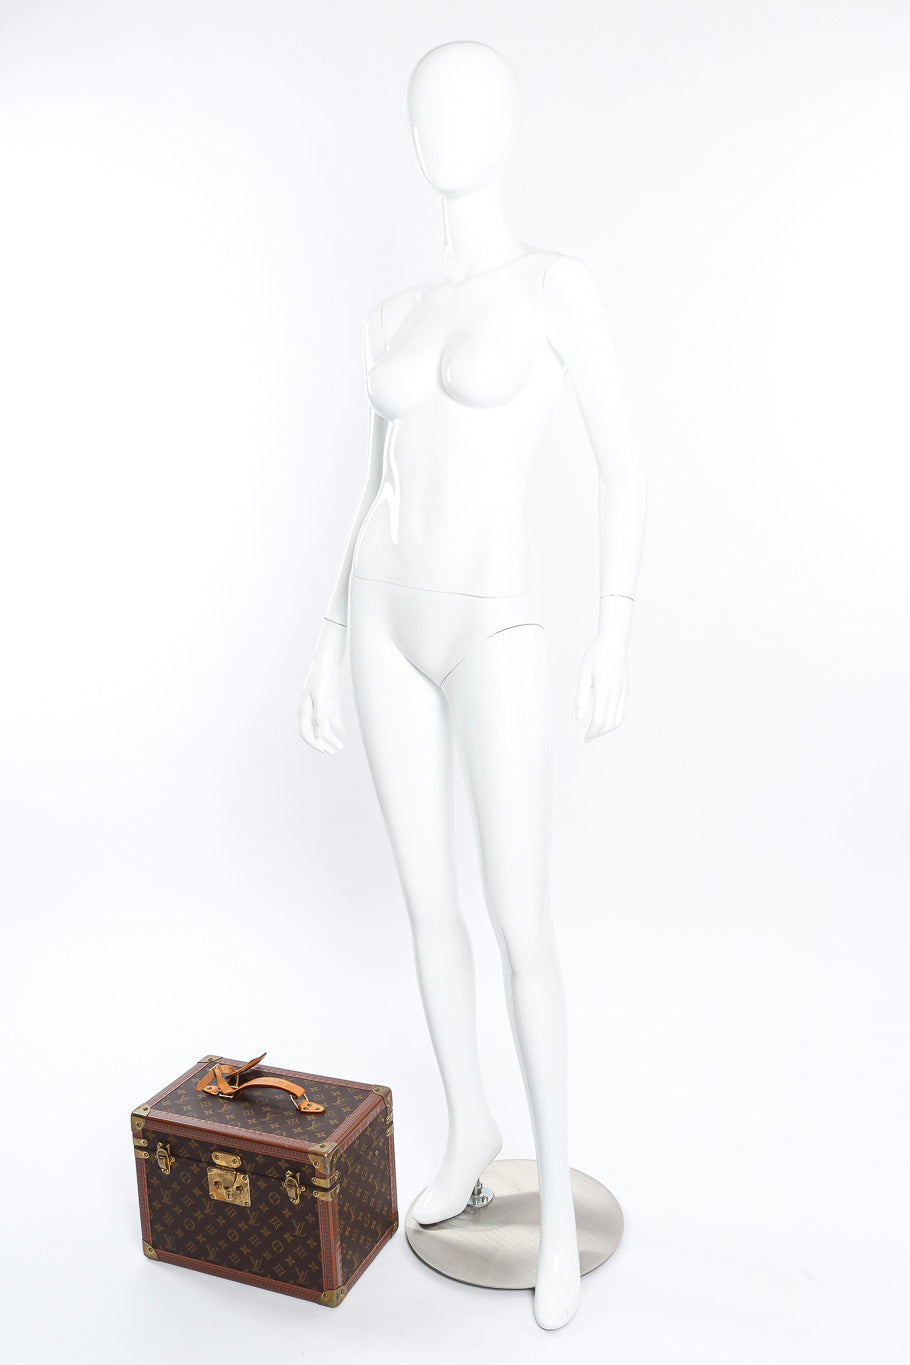 Vintage Louis Vuitton Classic Monogram Vanity Case on the floor next to mannequin for size reference @Recessla